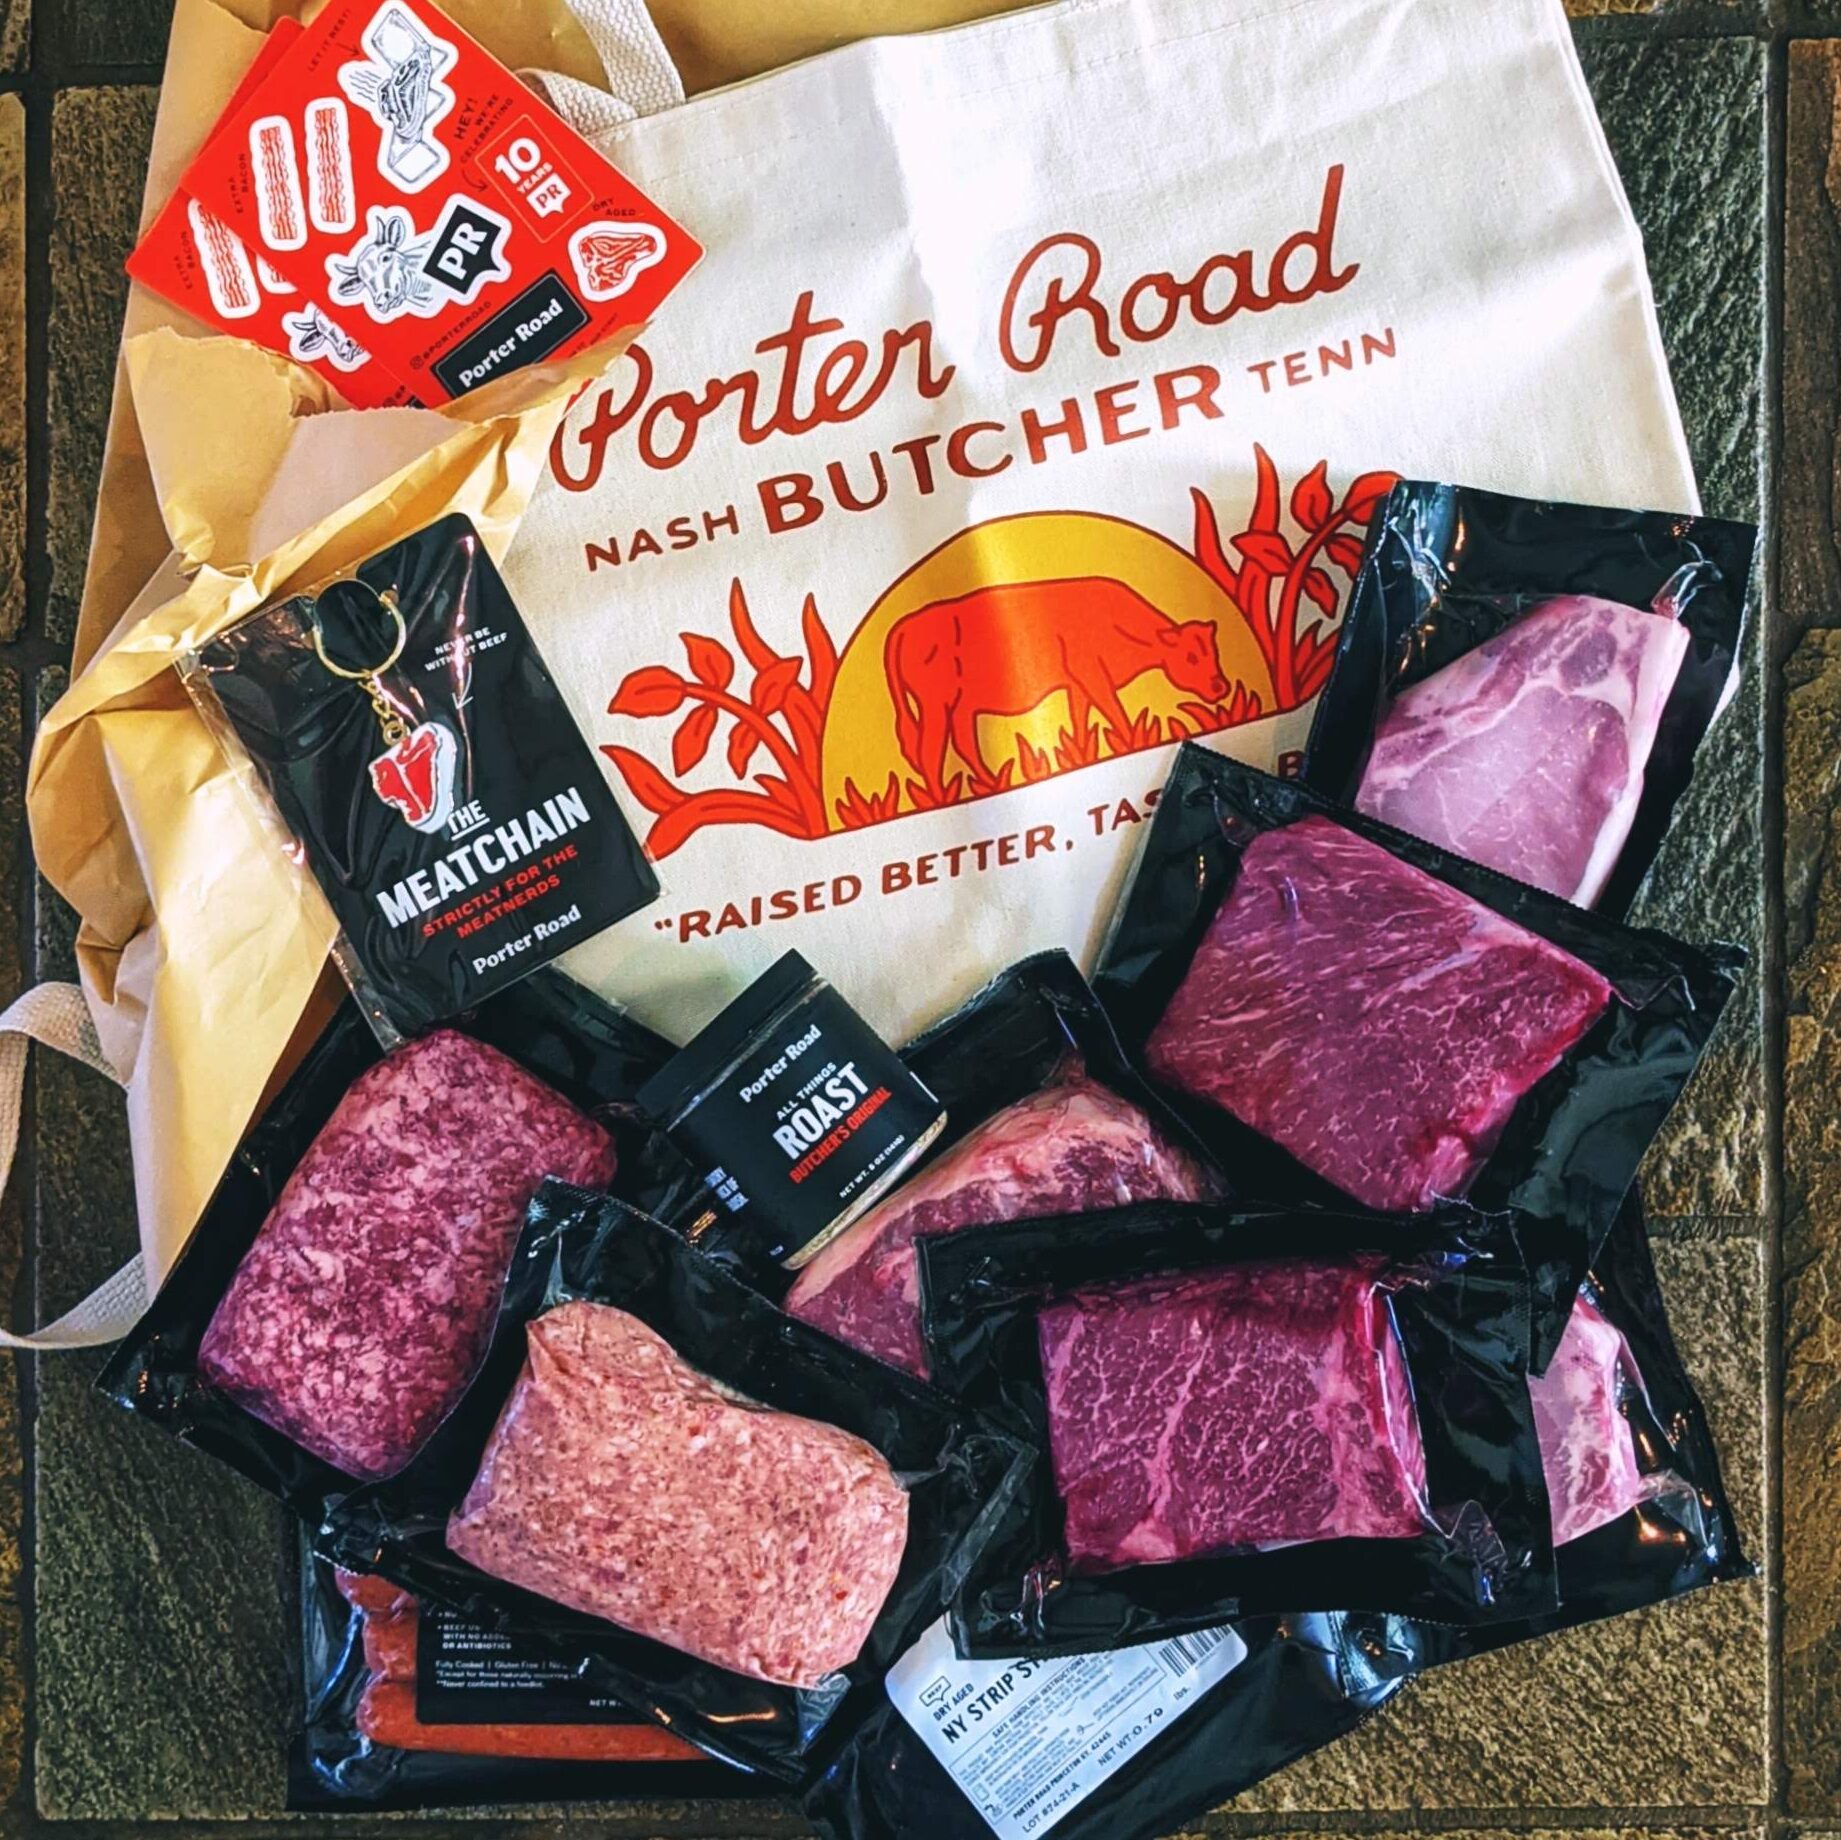 Variety of packaged meats in porter road packaging with bag to show branding.